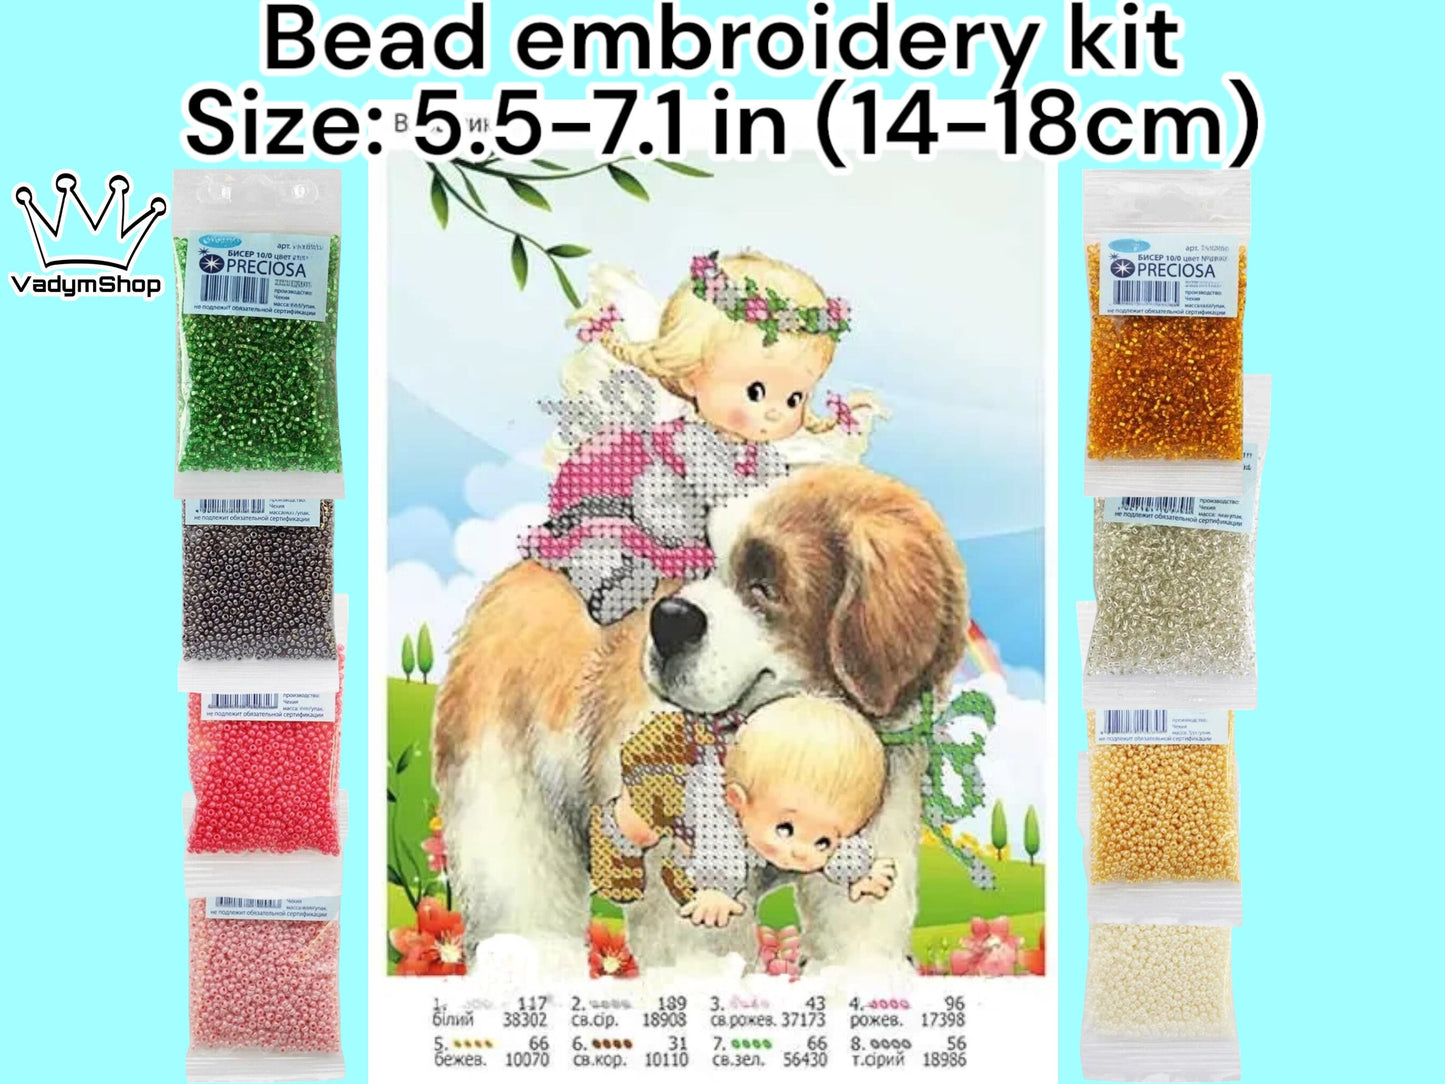 Small Bead embroidery kit "Аngels and dog". Size: 5.5-7.1 in (14-18cm) - VadymShop